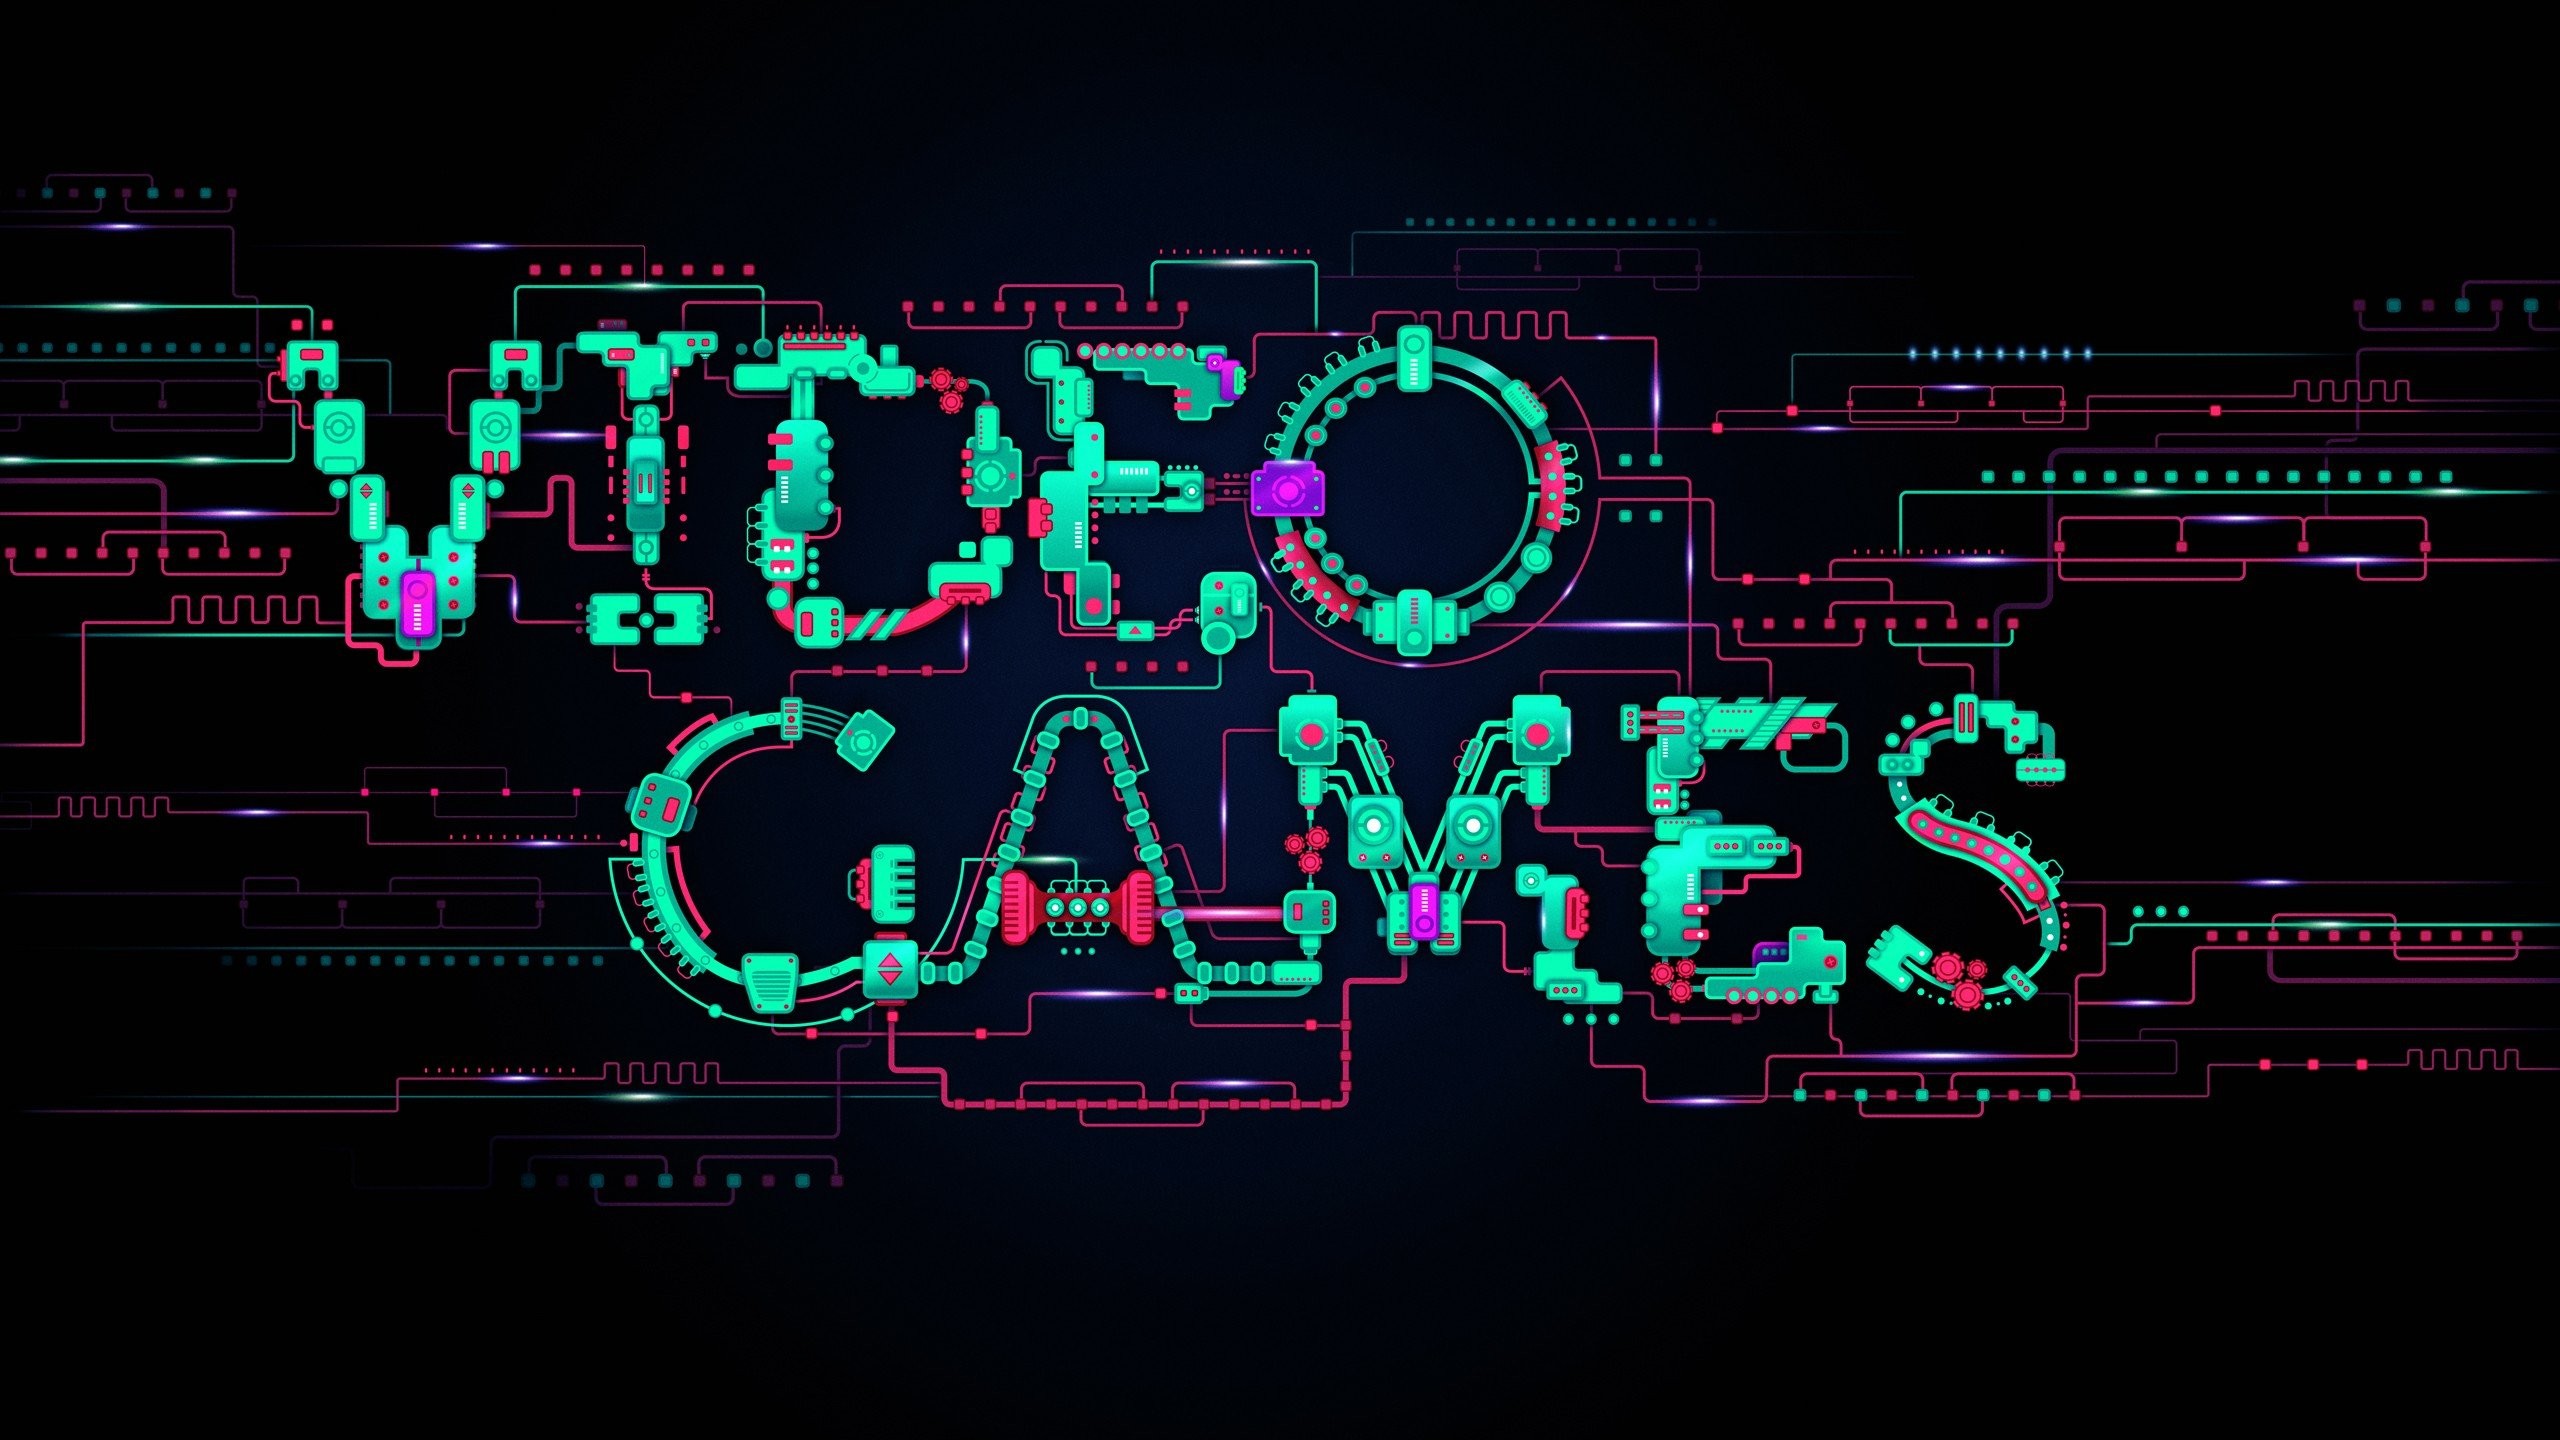 digital Art, Minimalism, Text, Video Games, Lines, Circuit Boards, Simple Background, Glowing, Technology, Computer, Typography, Electricity Wallpaper